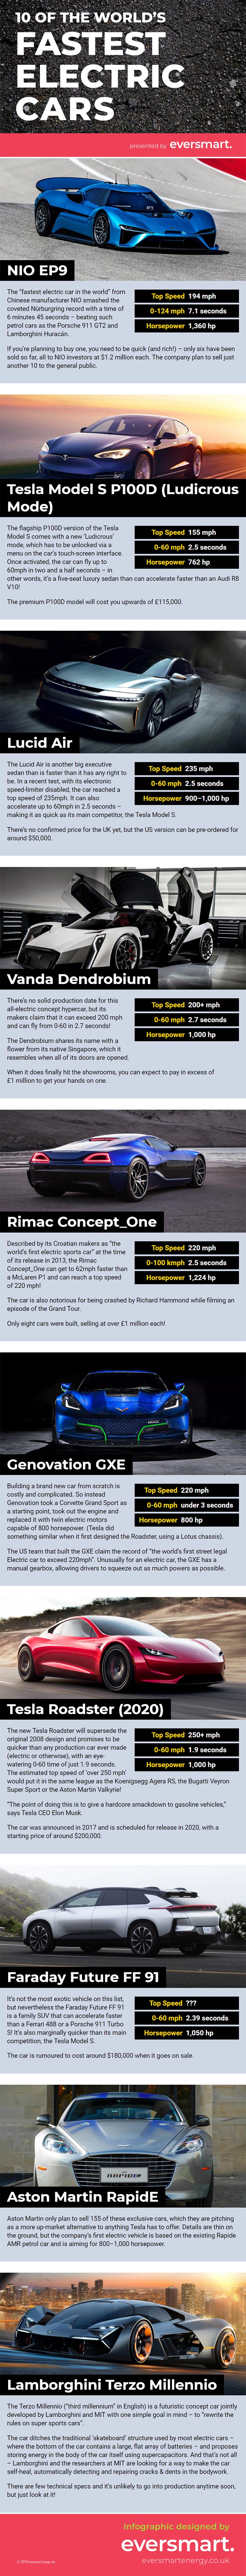 fastest electric cars infographic